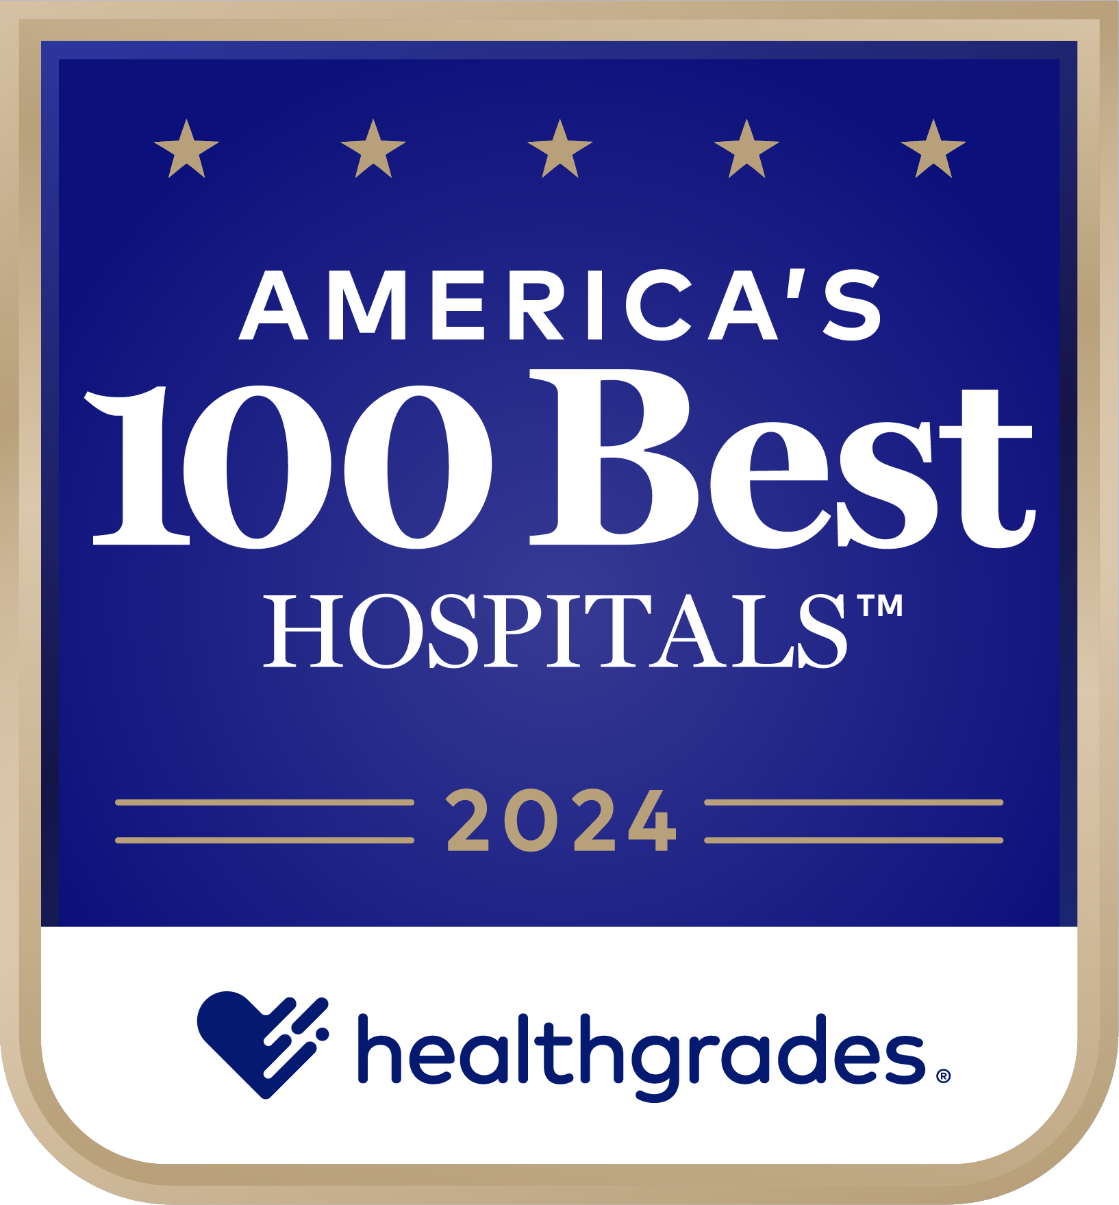 Saint Joseph Hospital has received national accolades for being one of America’s 100 Best Hospitals for 2024, according to new research released by Healthgrades, the leading resource consumers use to find a hospital or doctor.